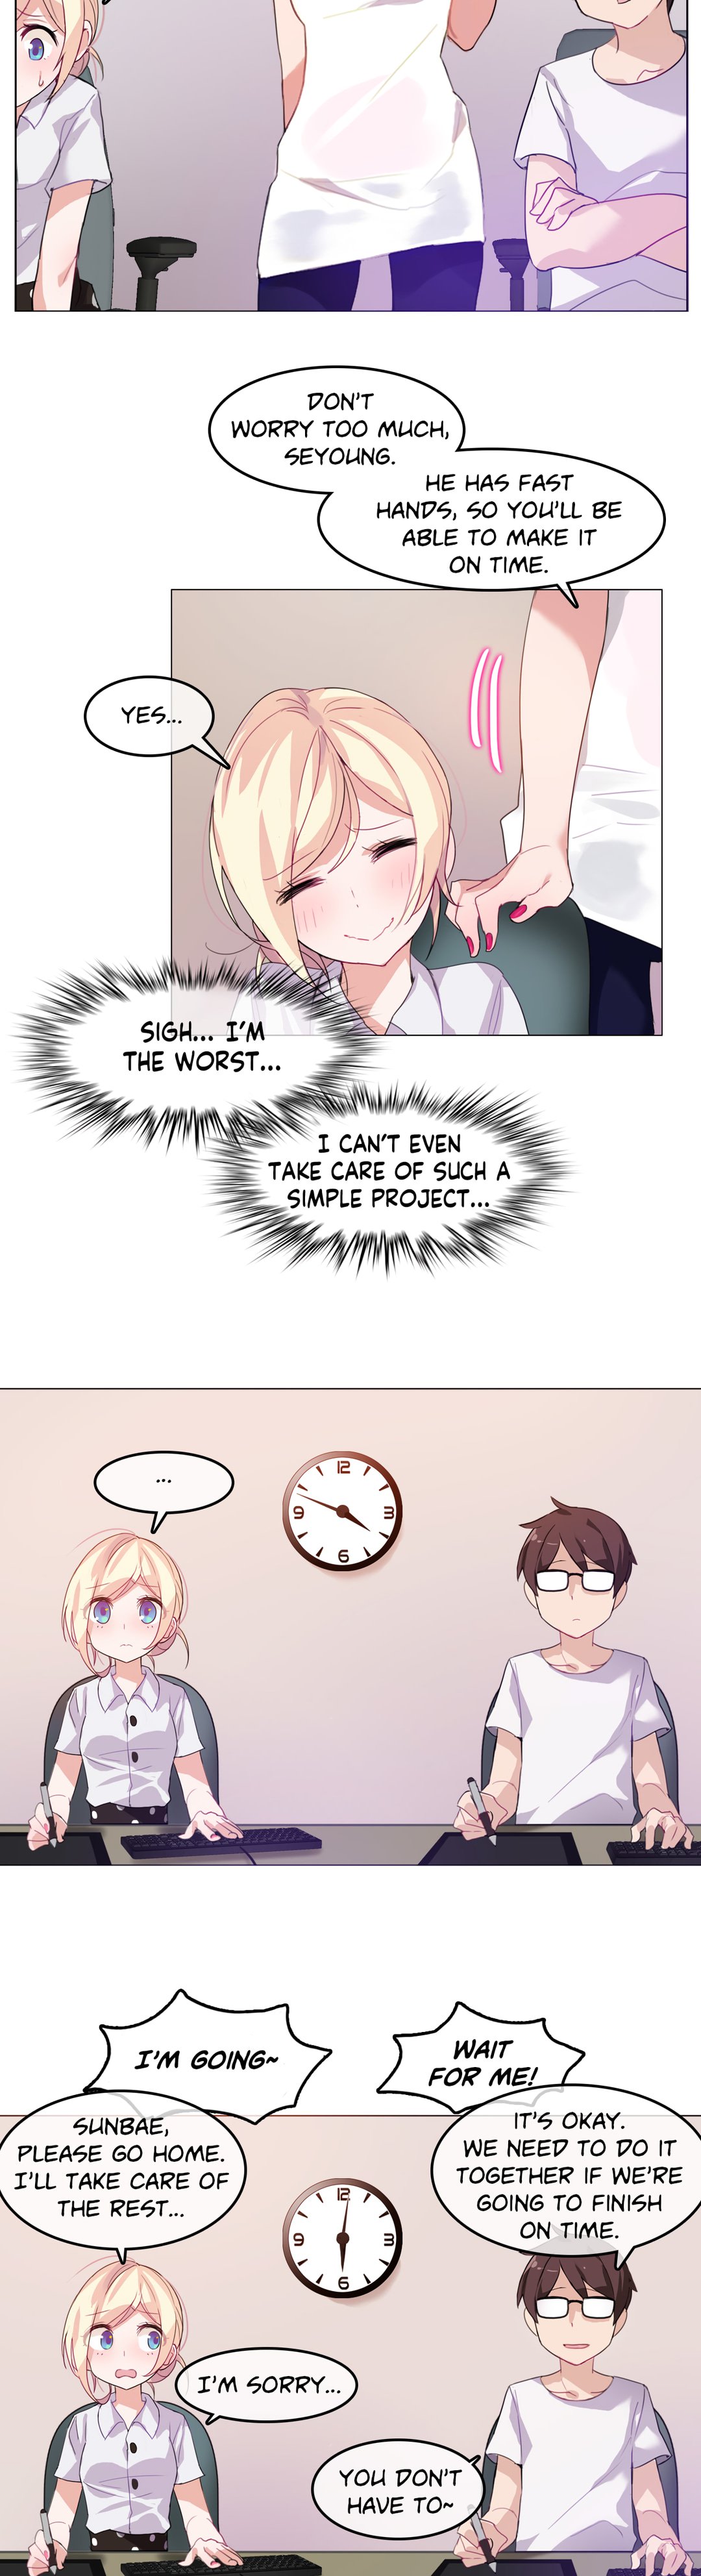 A Pervert's Daily Life Ch.3